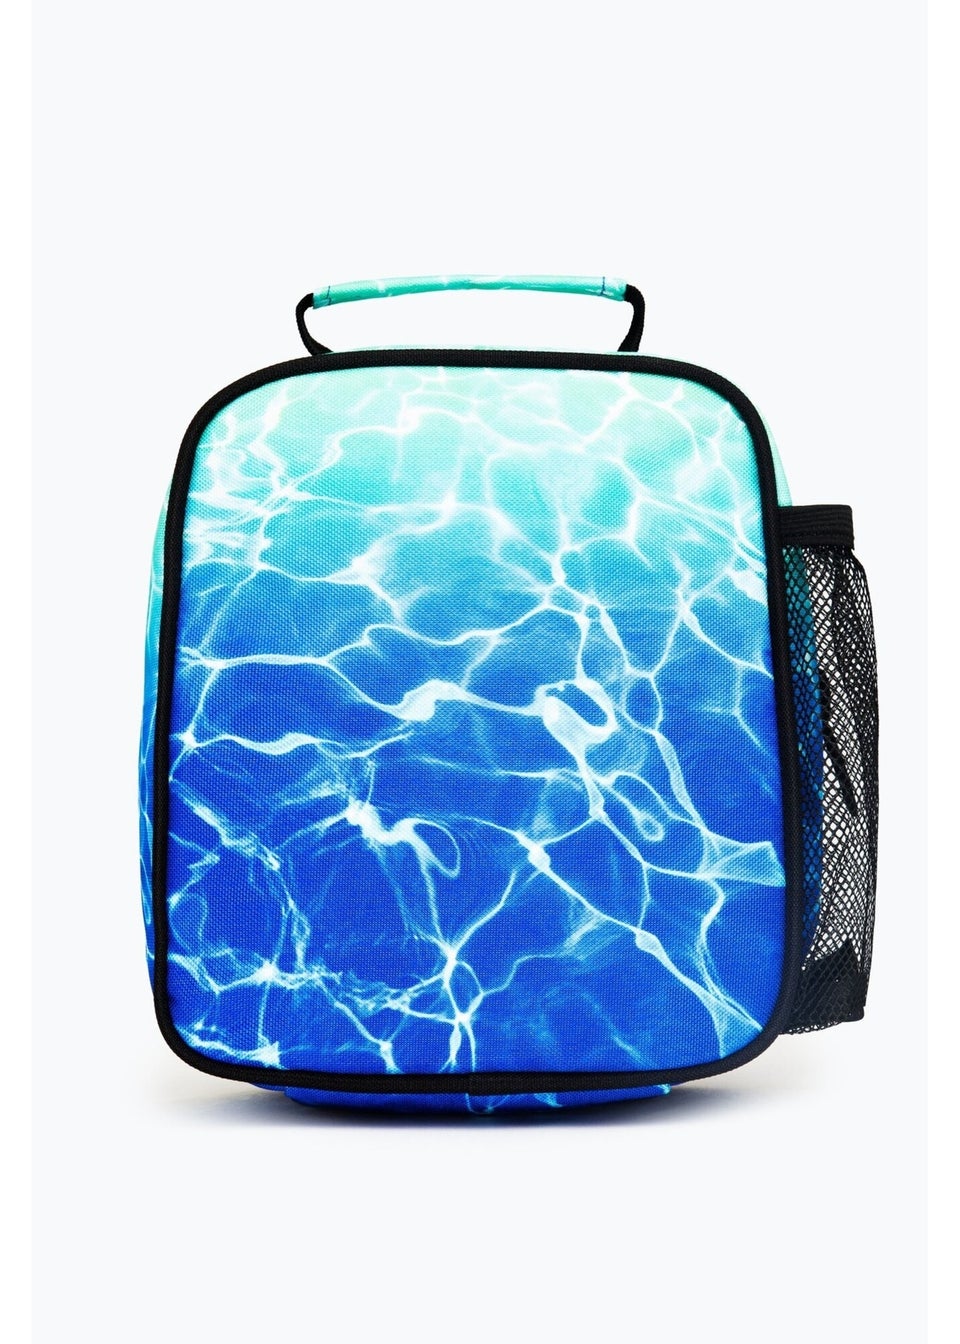 Hype Blue Pool Fade Lunch Bag